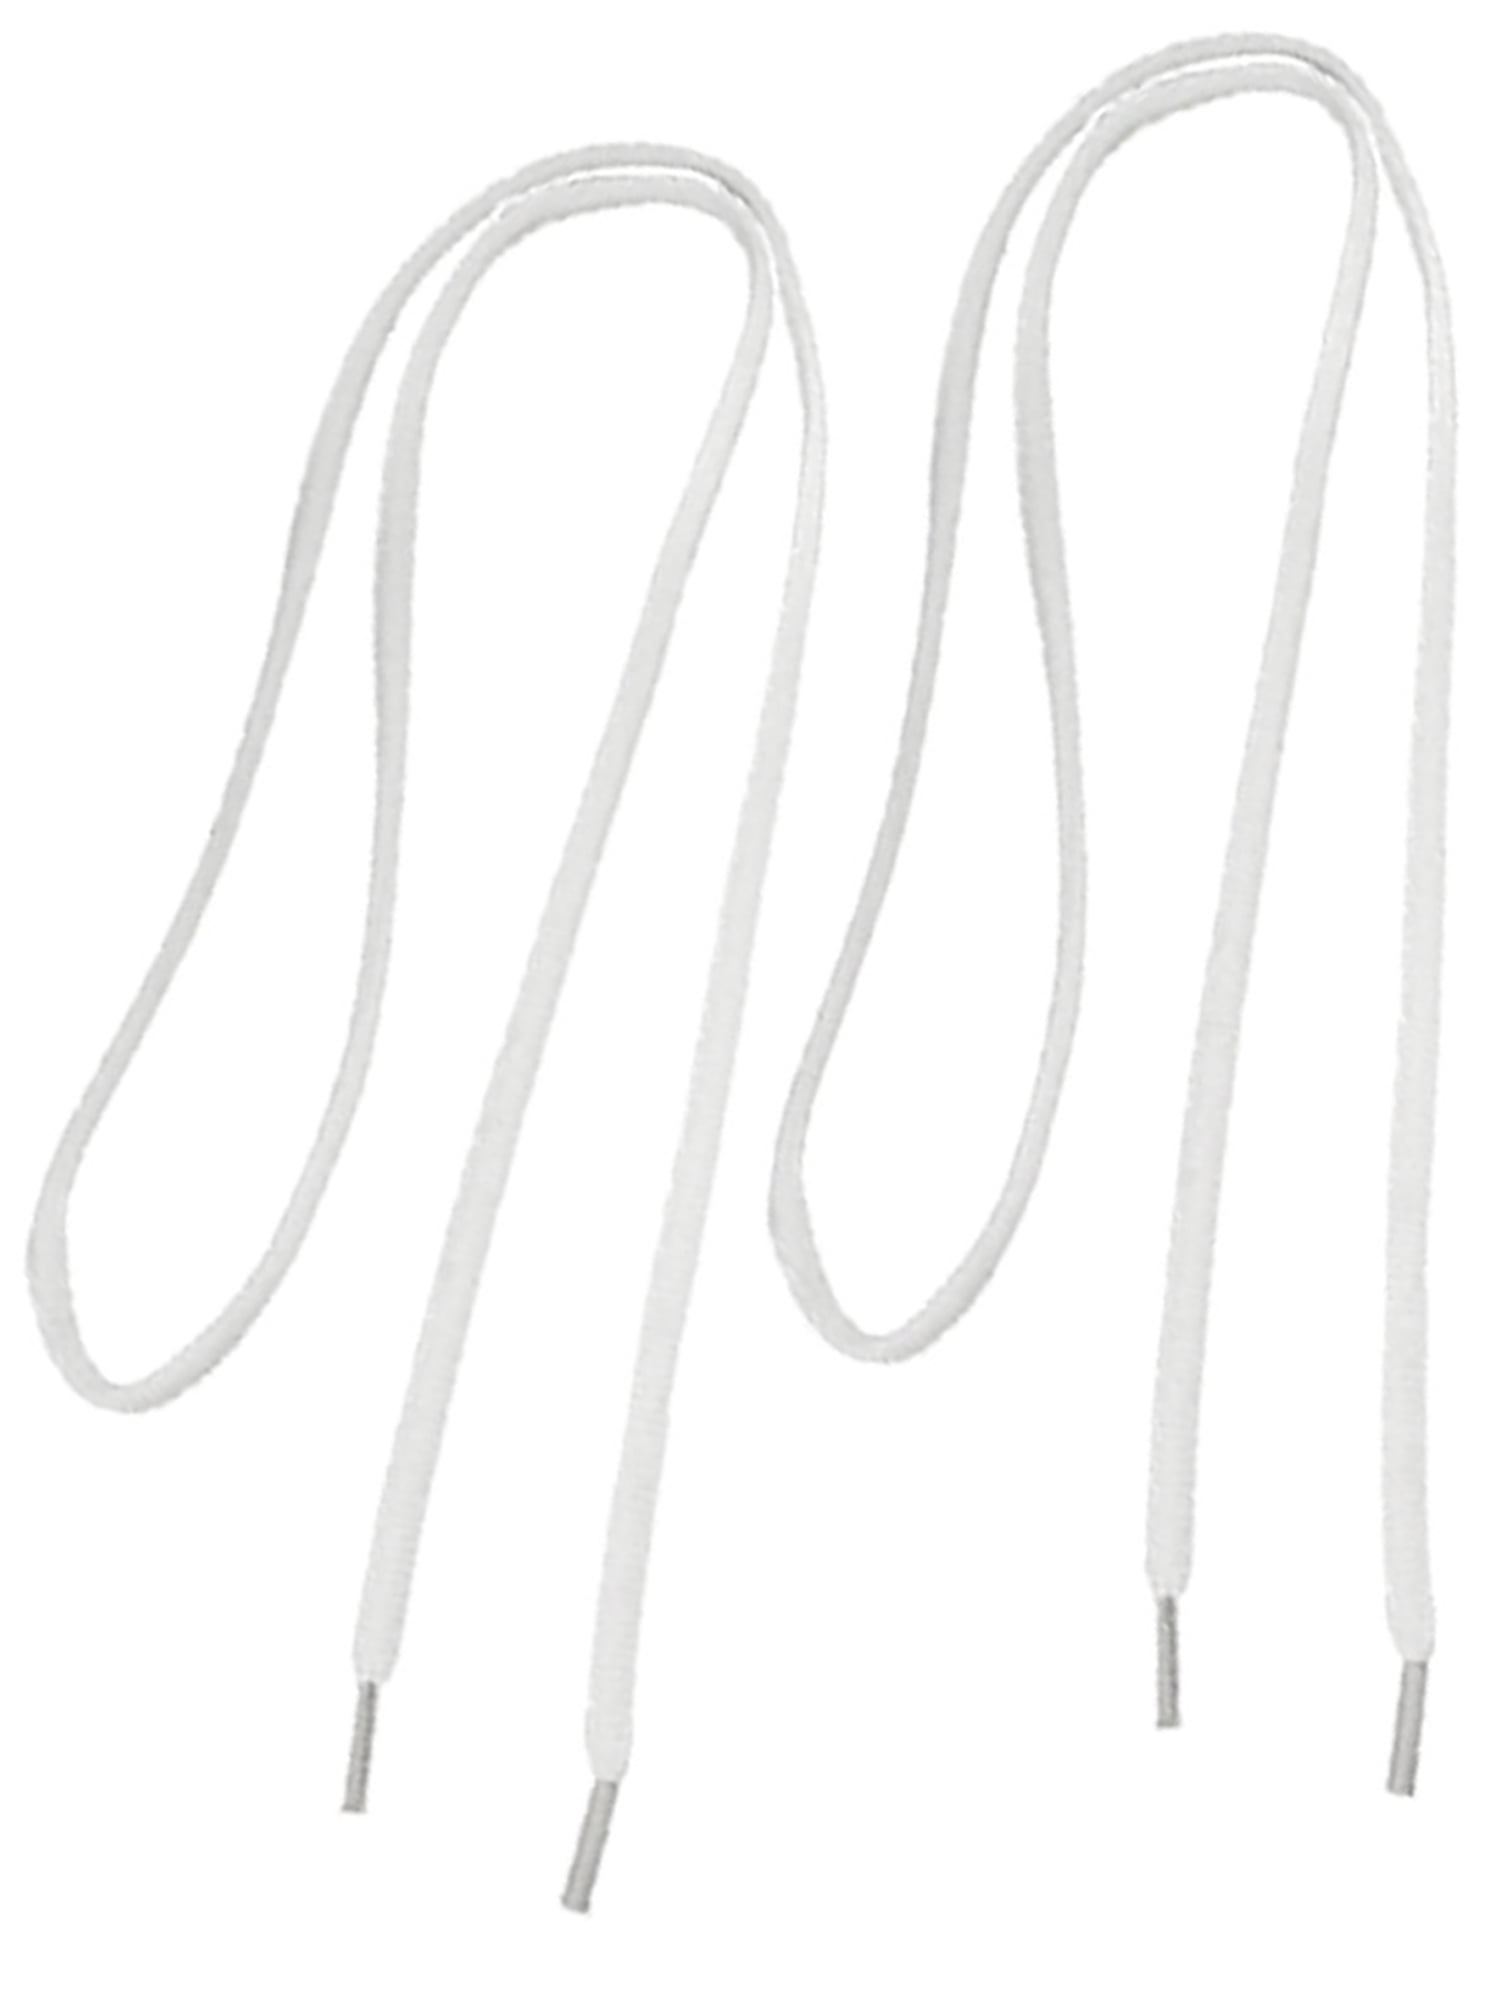 Round Shoelaces Shoes Strings - Walmart 